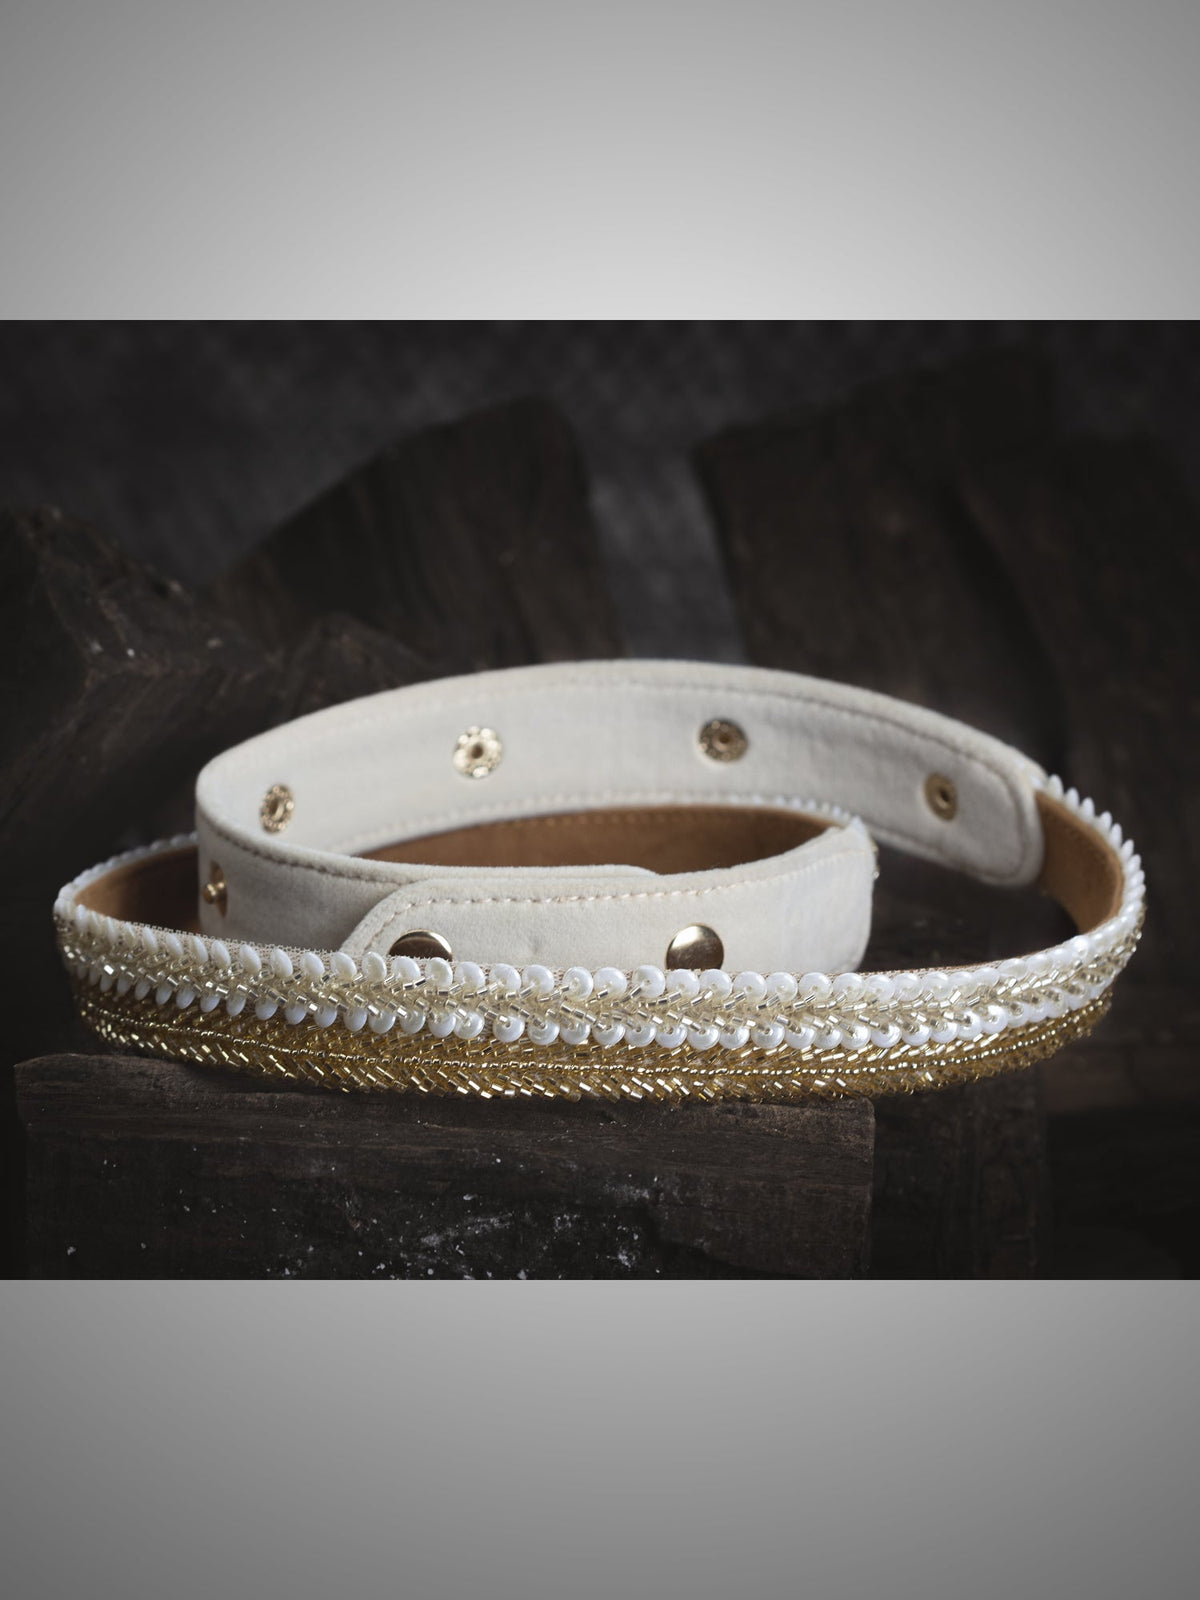 OLYMPIA GOLD WAIST BELT - House of D’oro